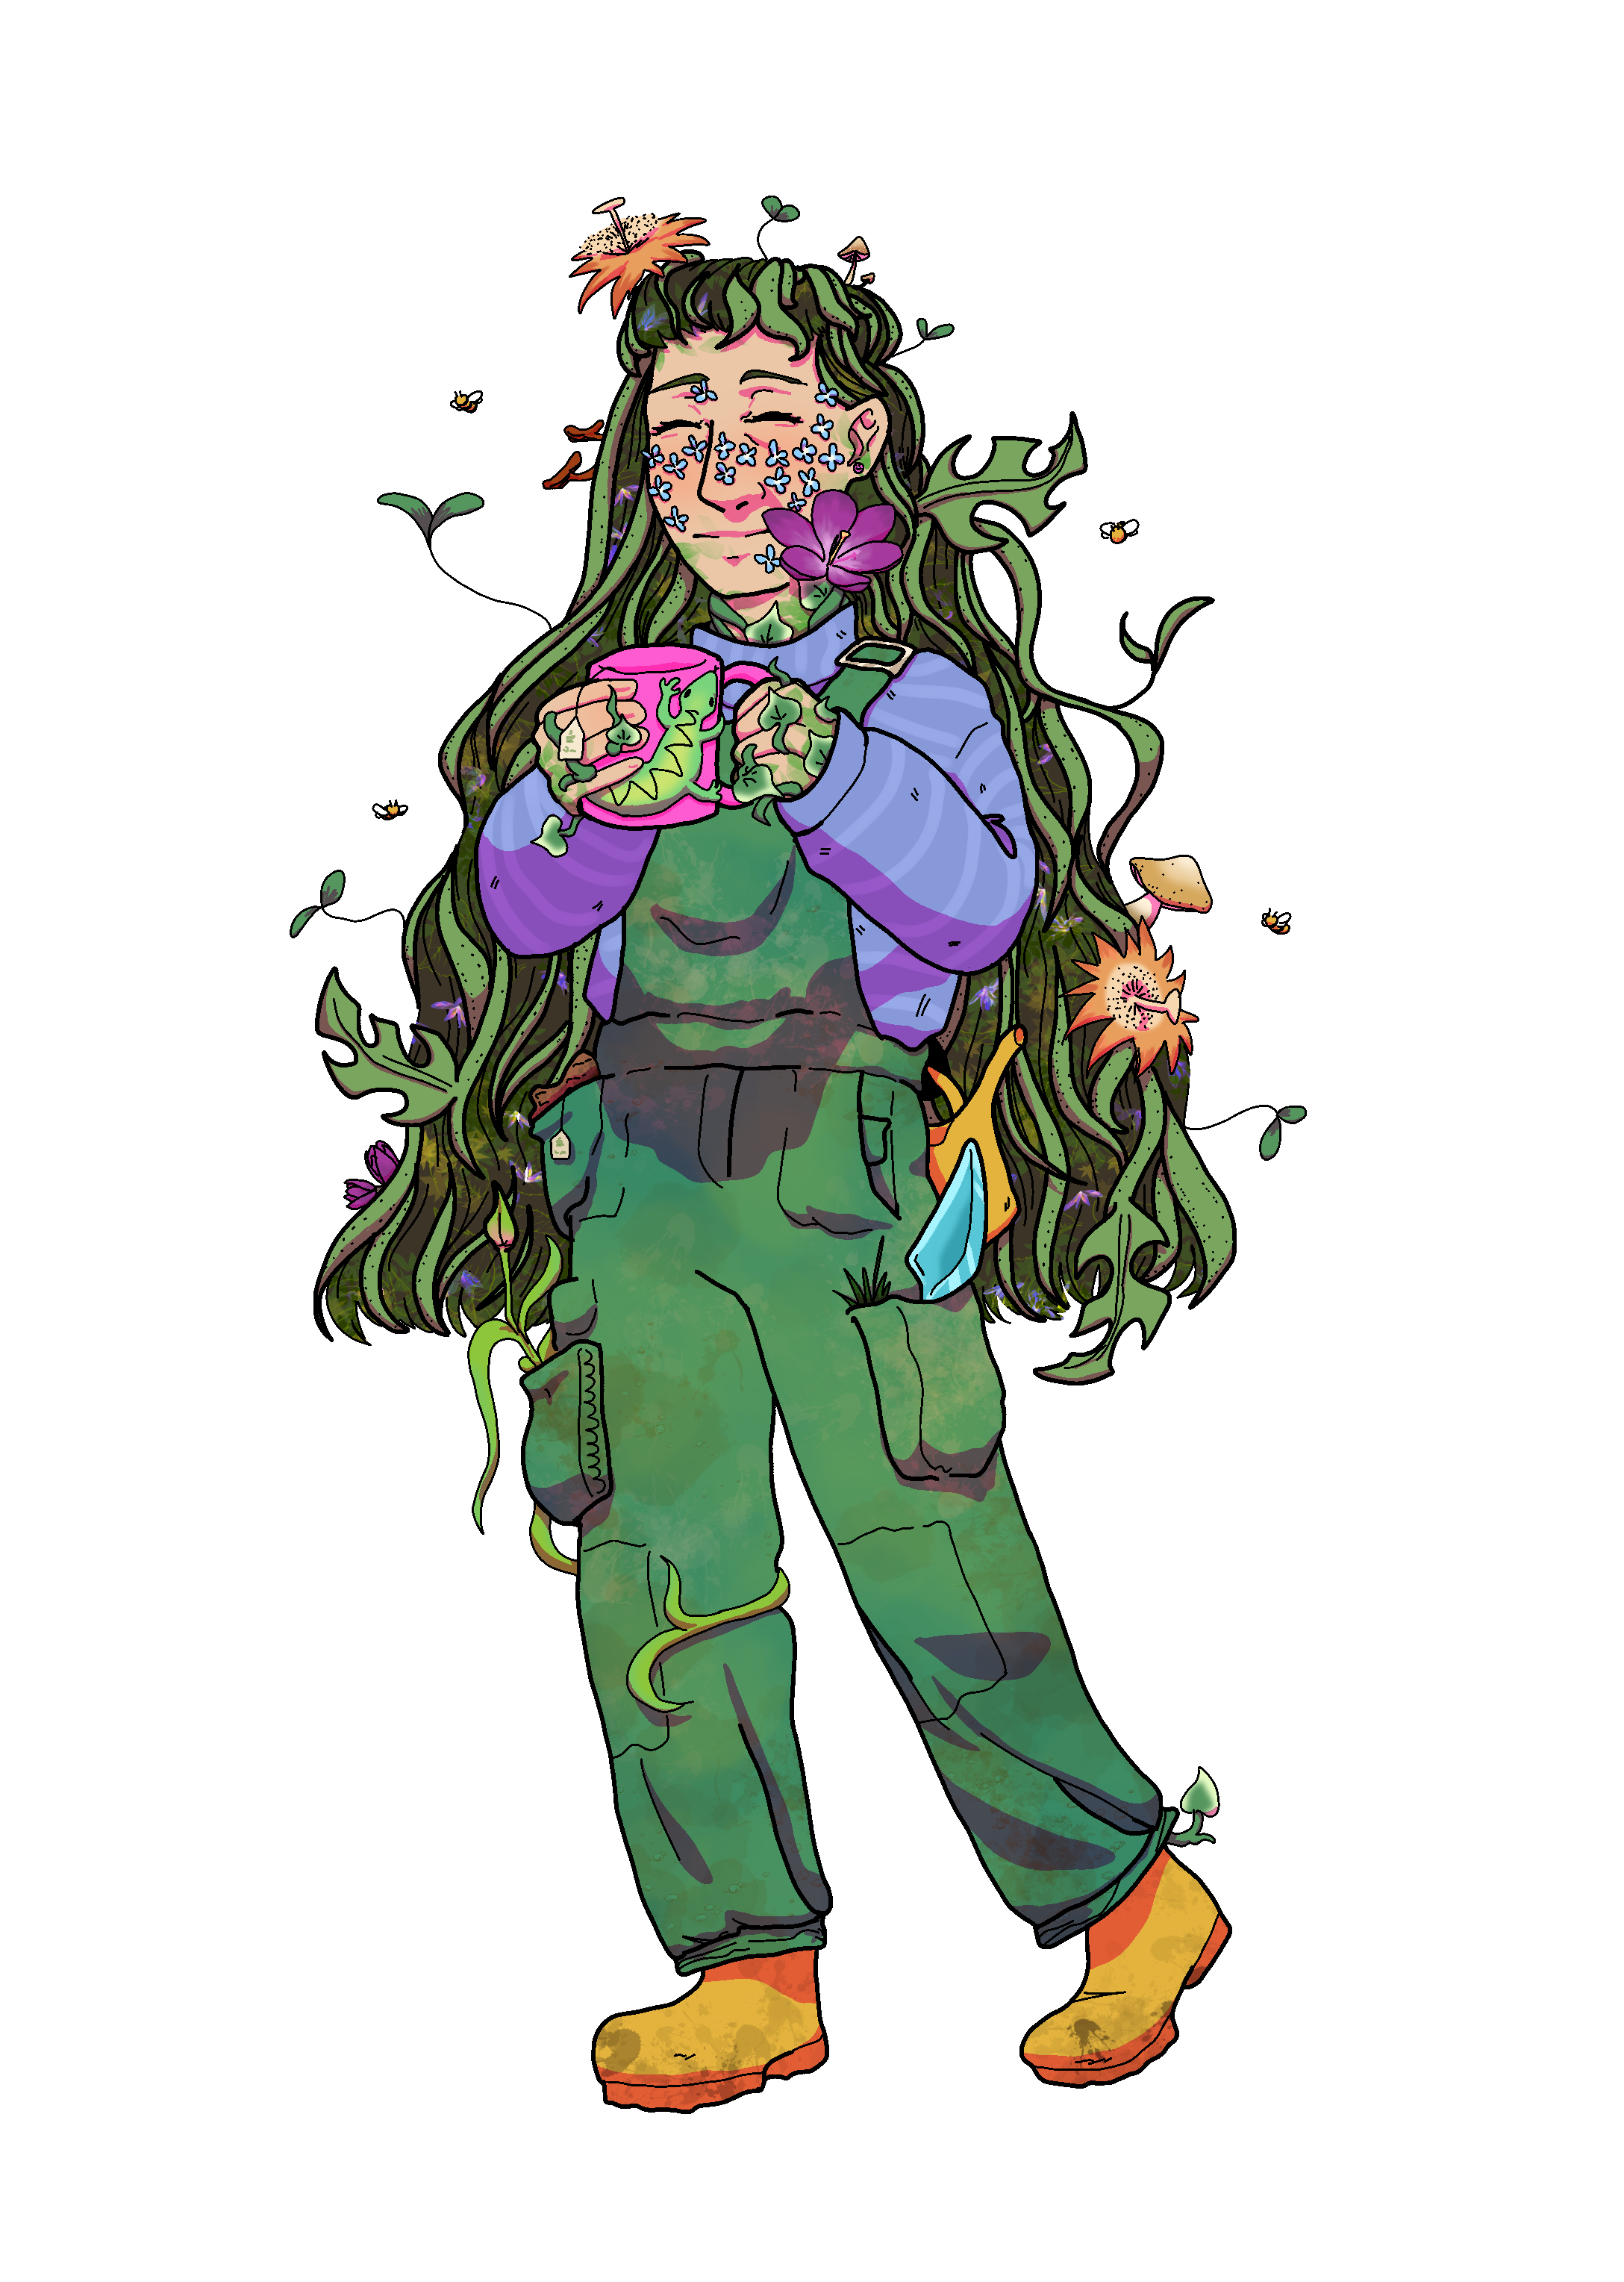 A person smiling and holding a mug. Their body is covered in many different plants.